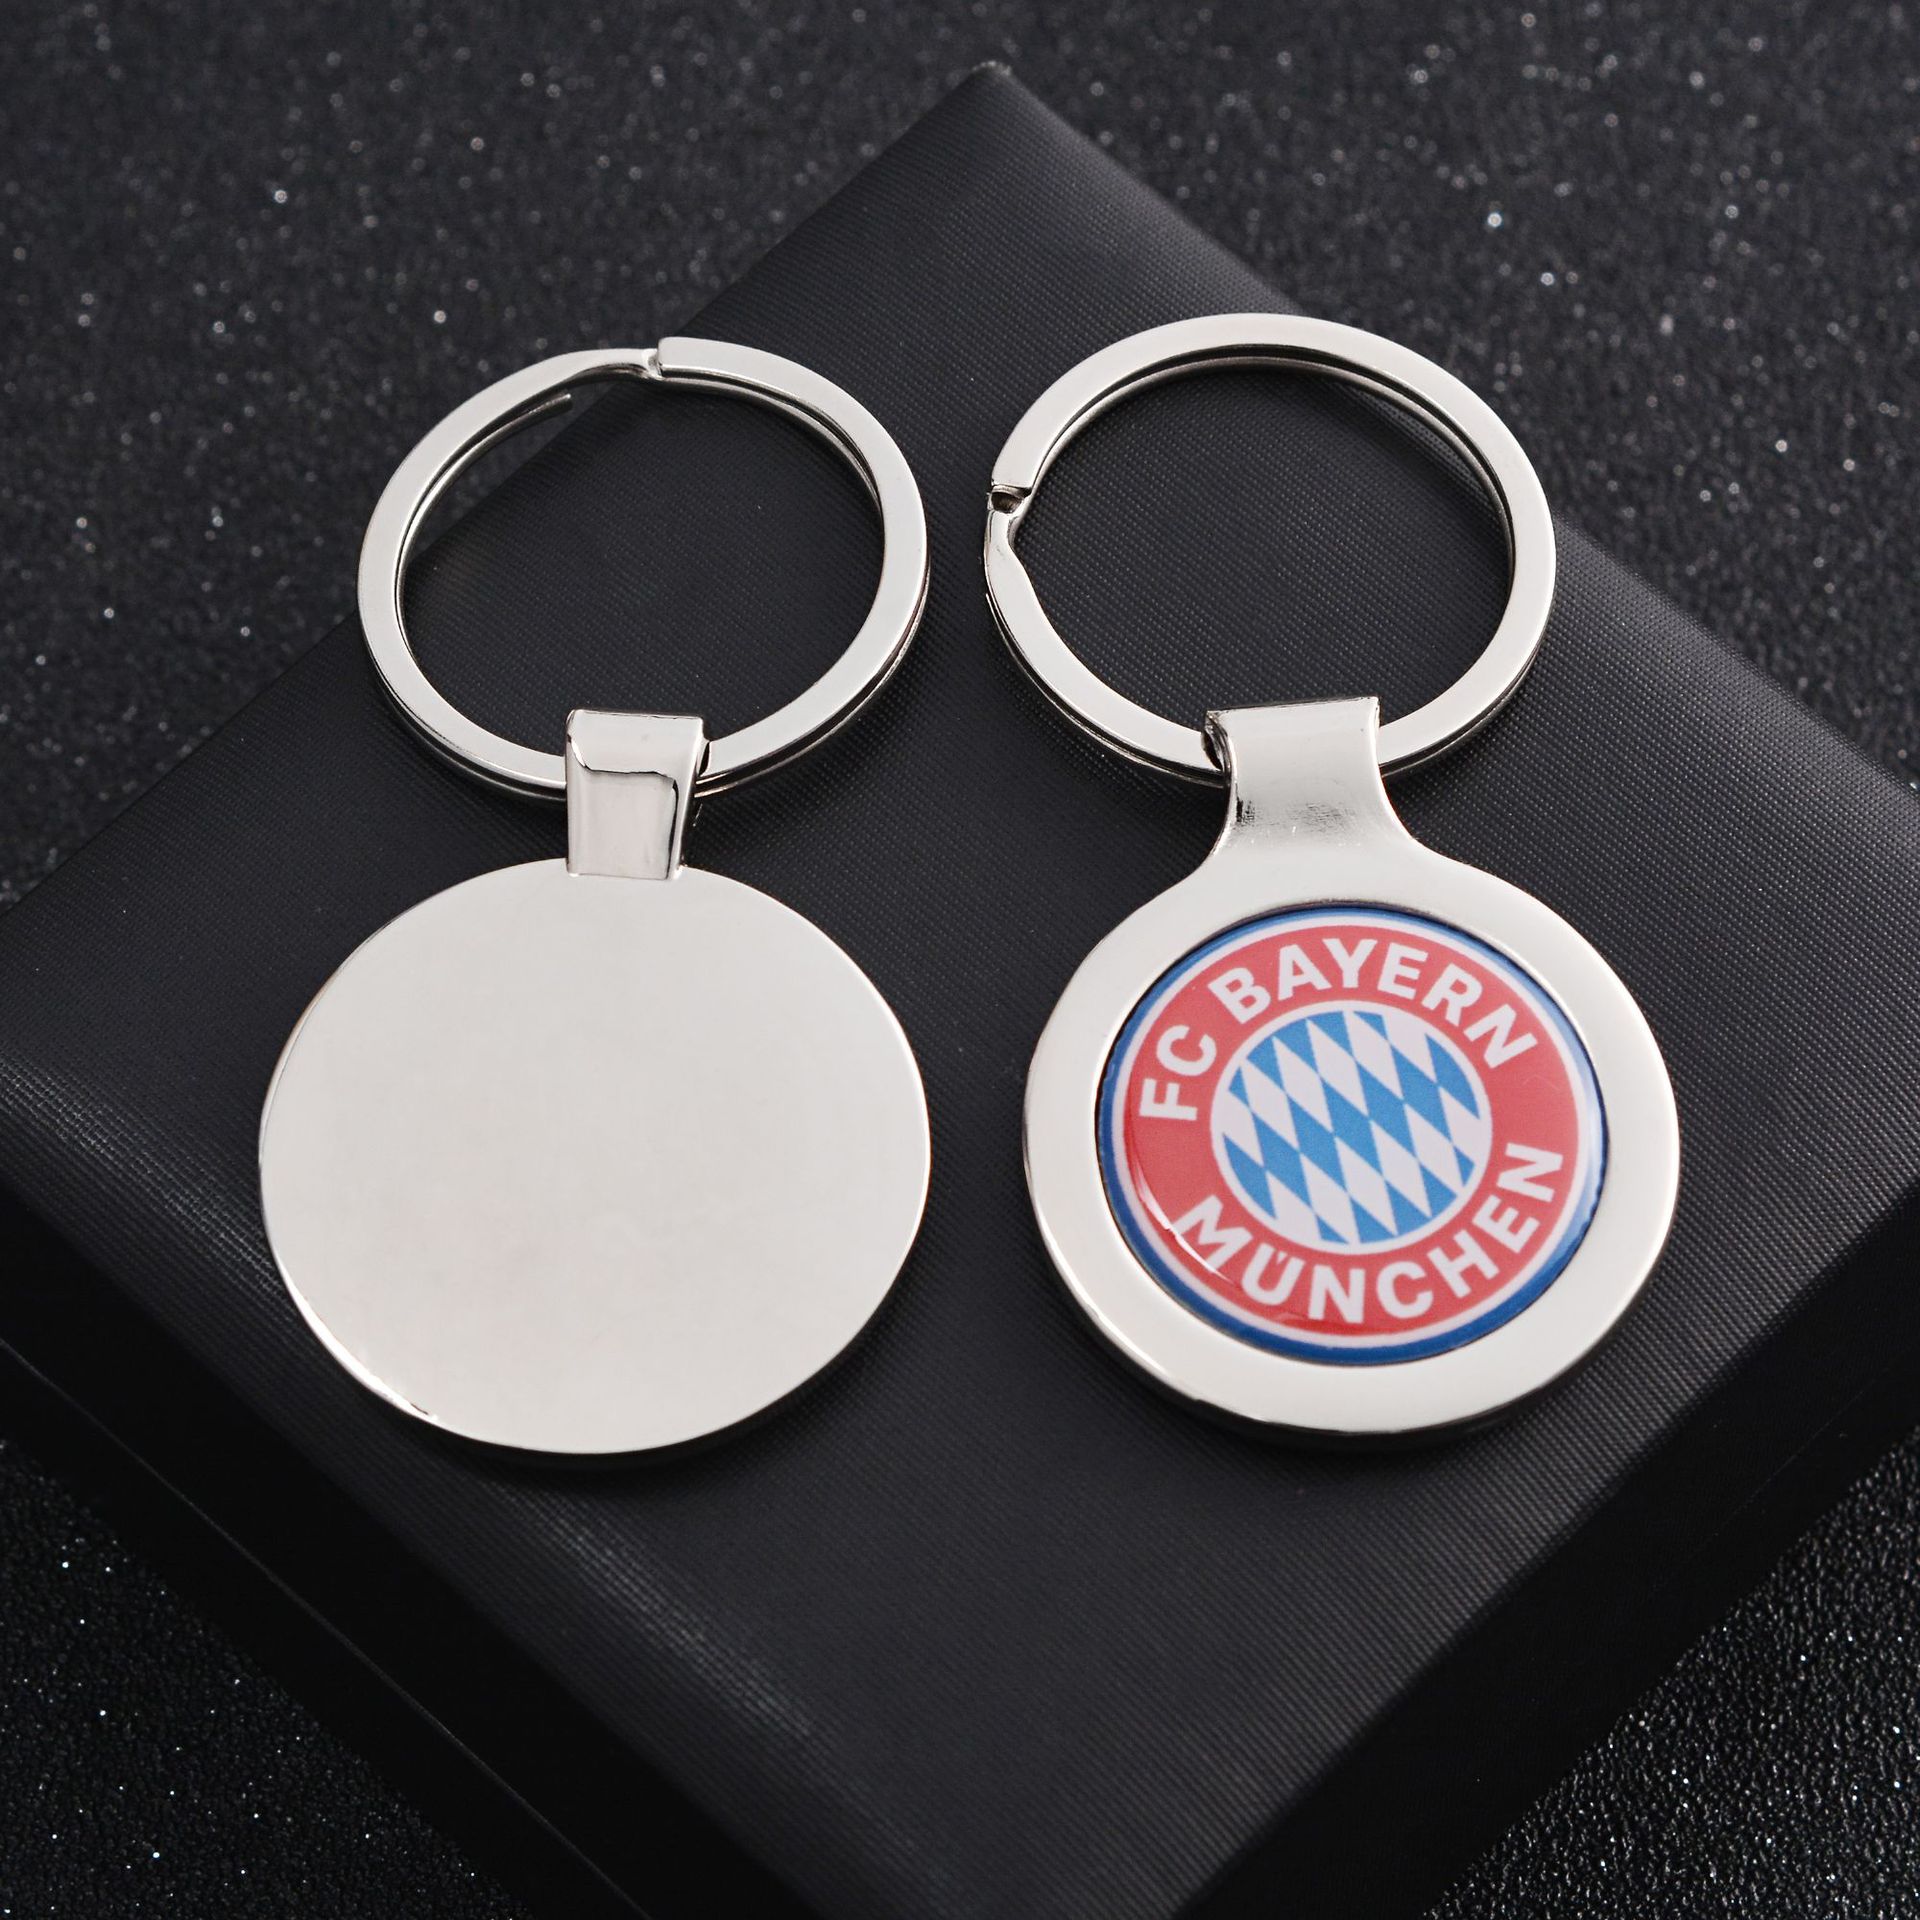 china Supply Black Custom The laser Metal material map shape / openers Key chains